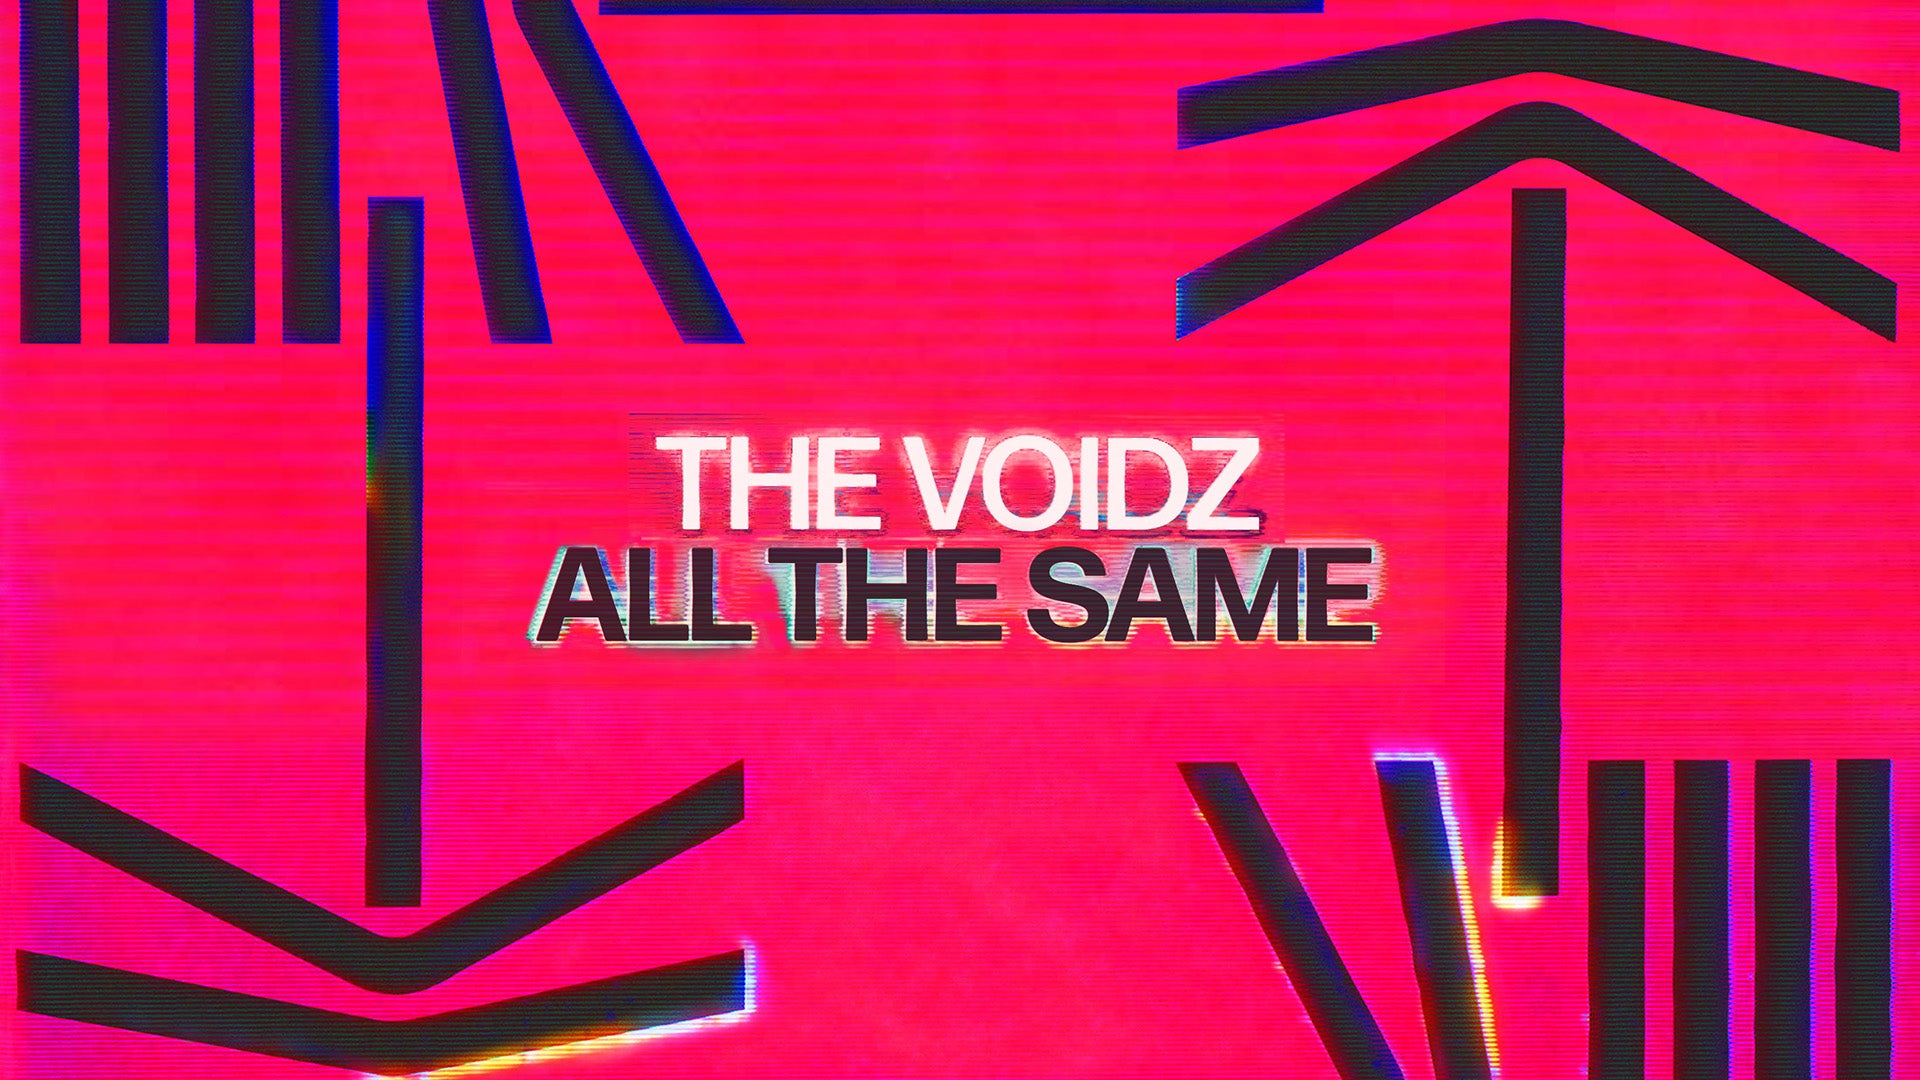 "All the Same" by The Voidz is OUT NOW